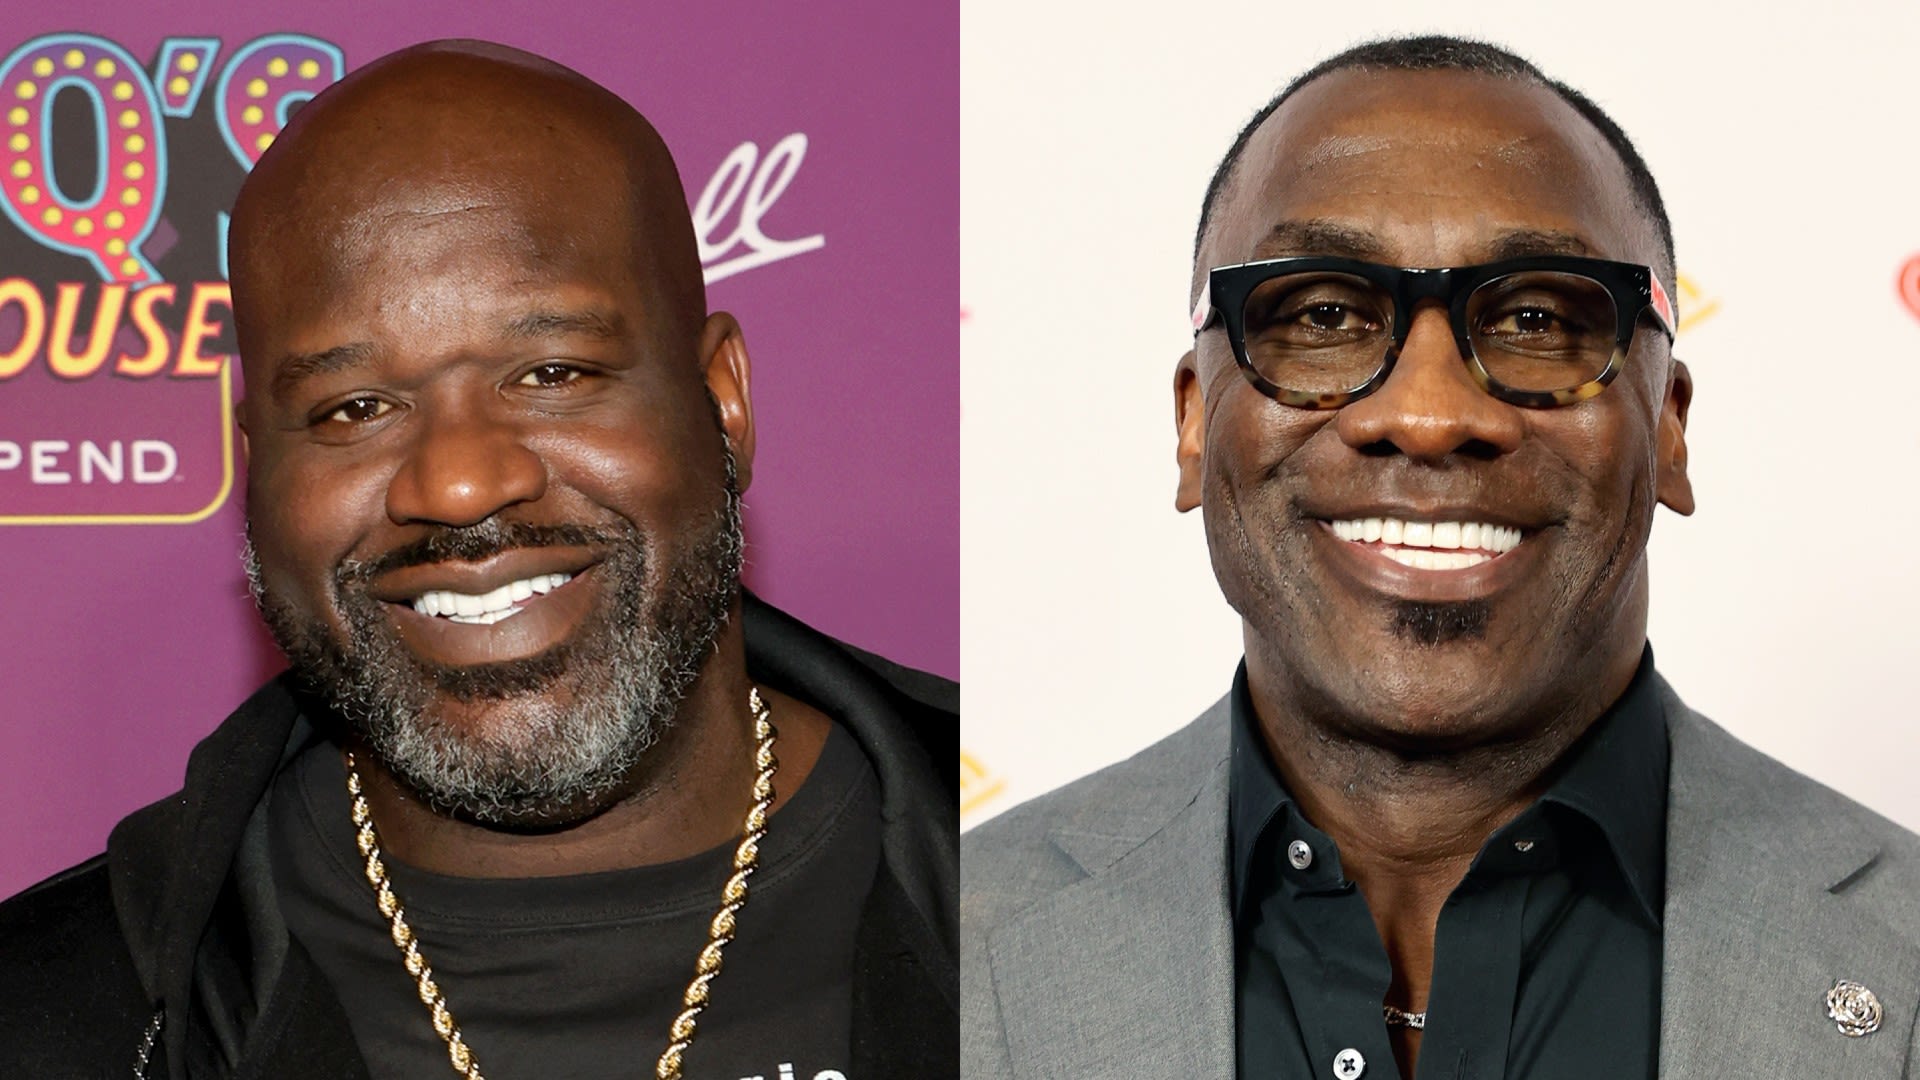 Shannon Sharpe delivers a healthy serving of truth in his beef with Shaquille O’Neal